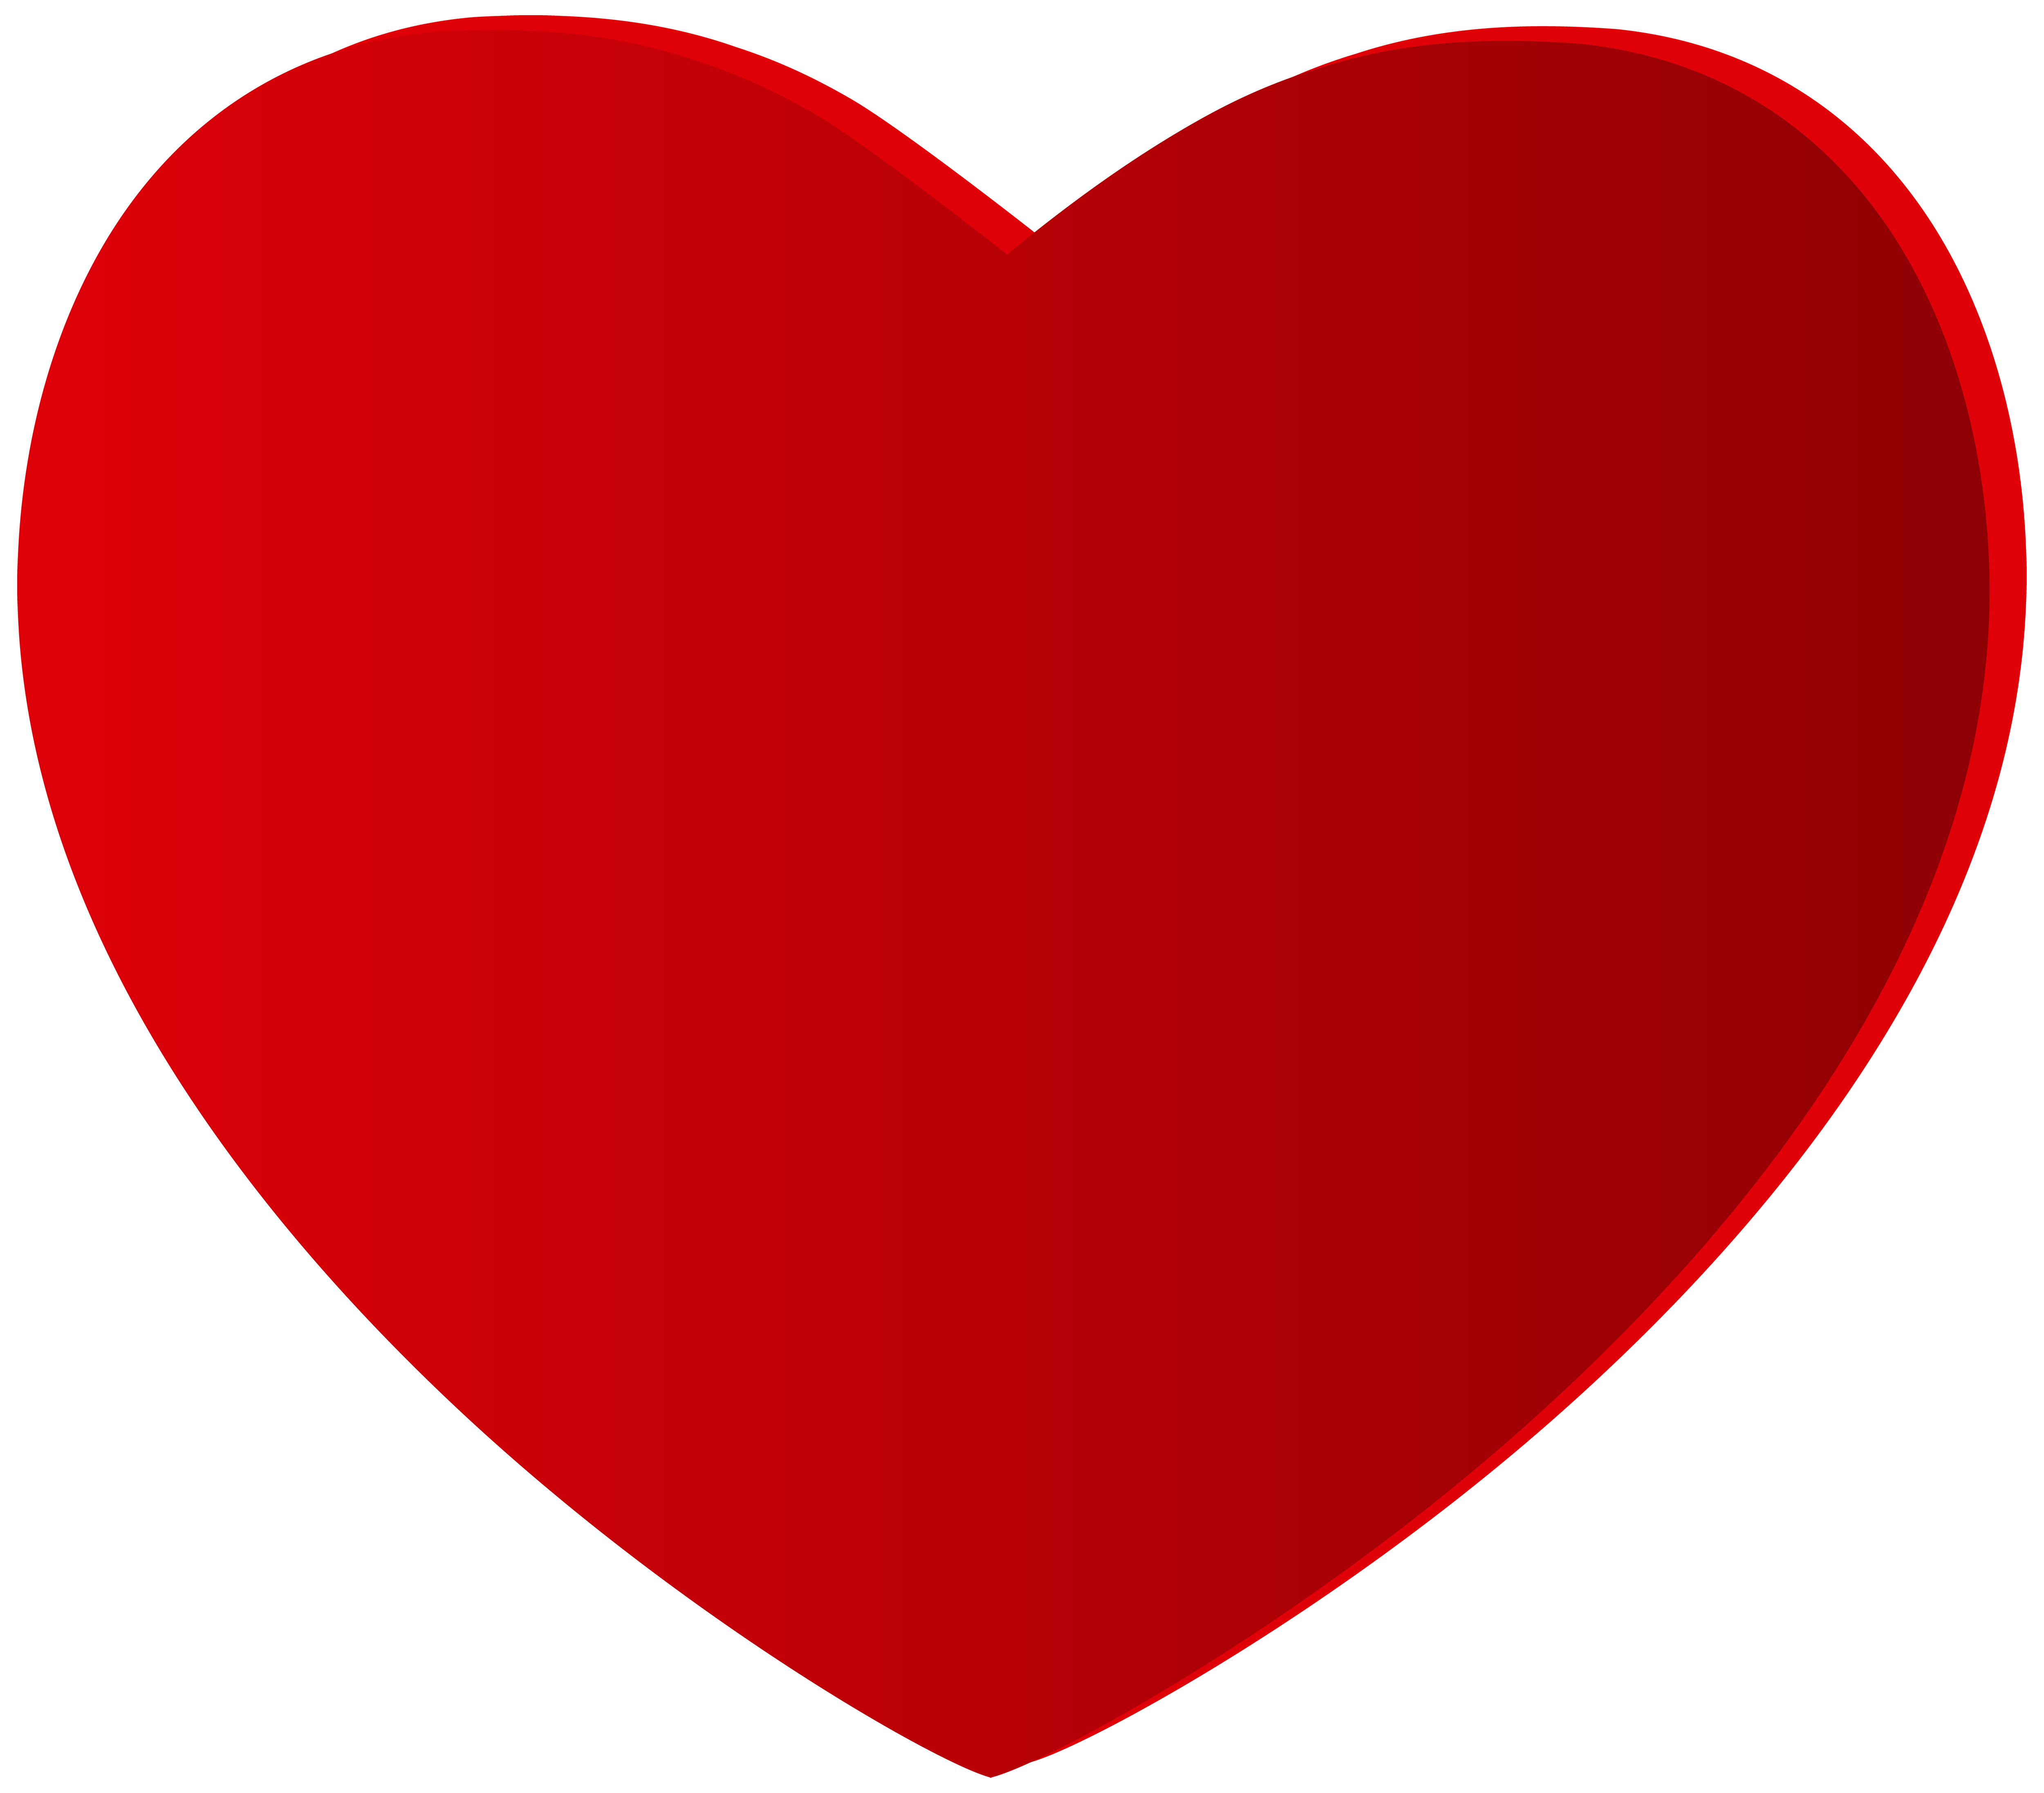 Large red clipart best. Heart images png